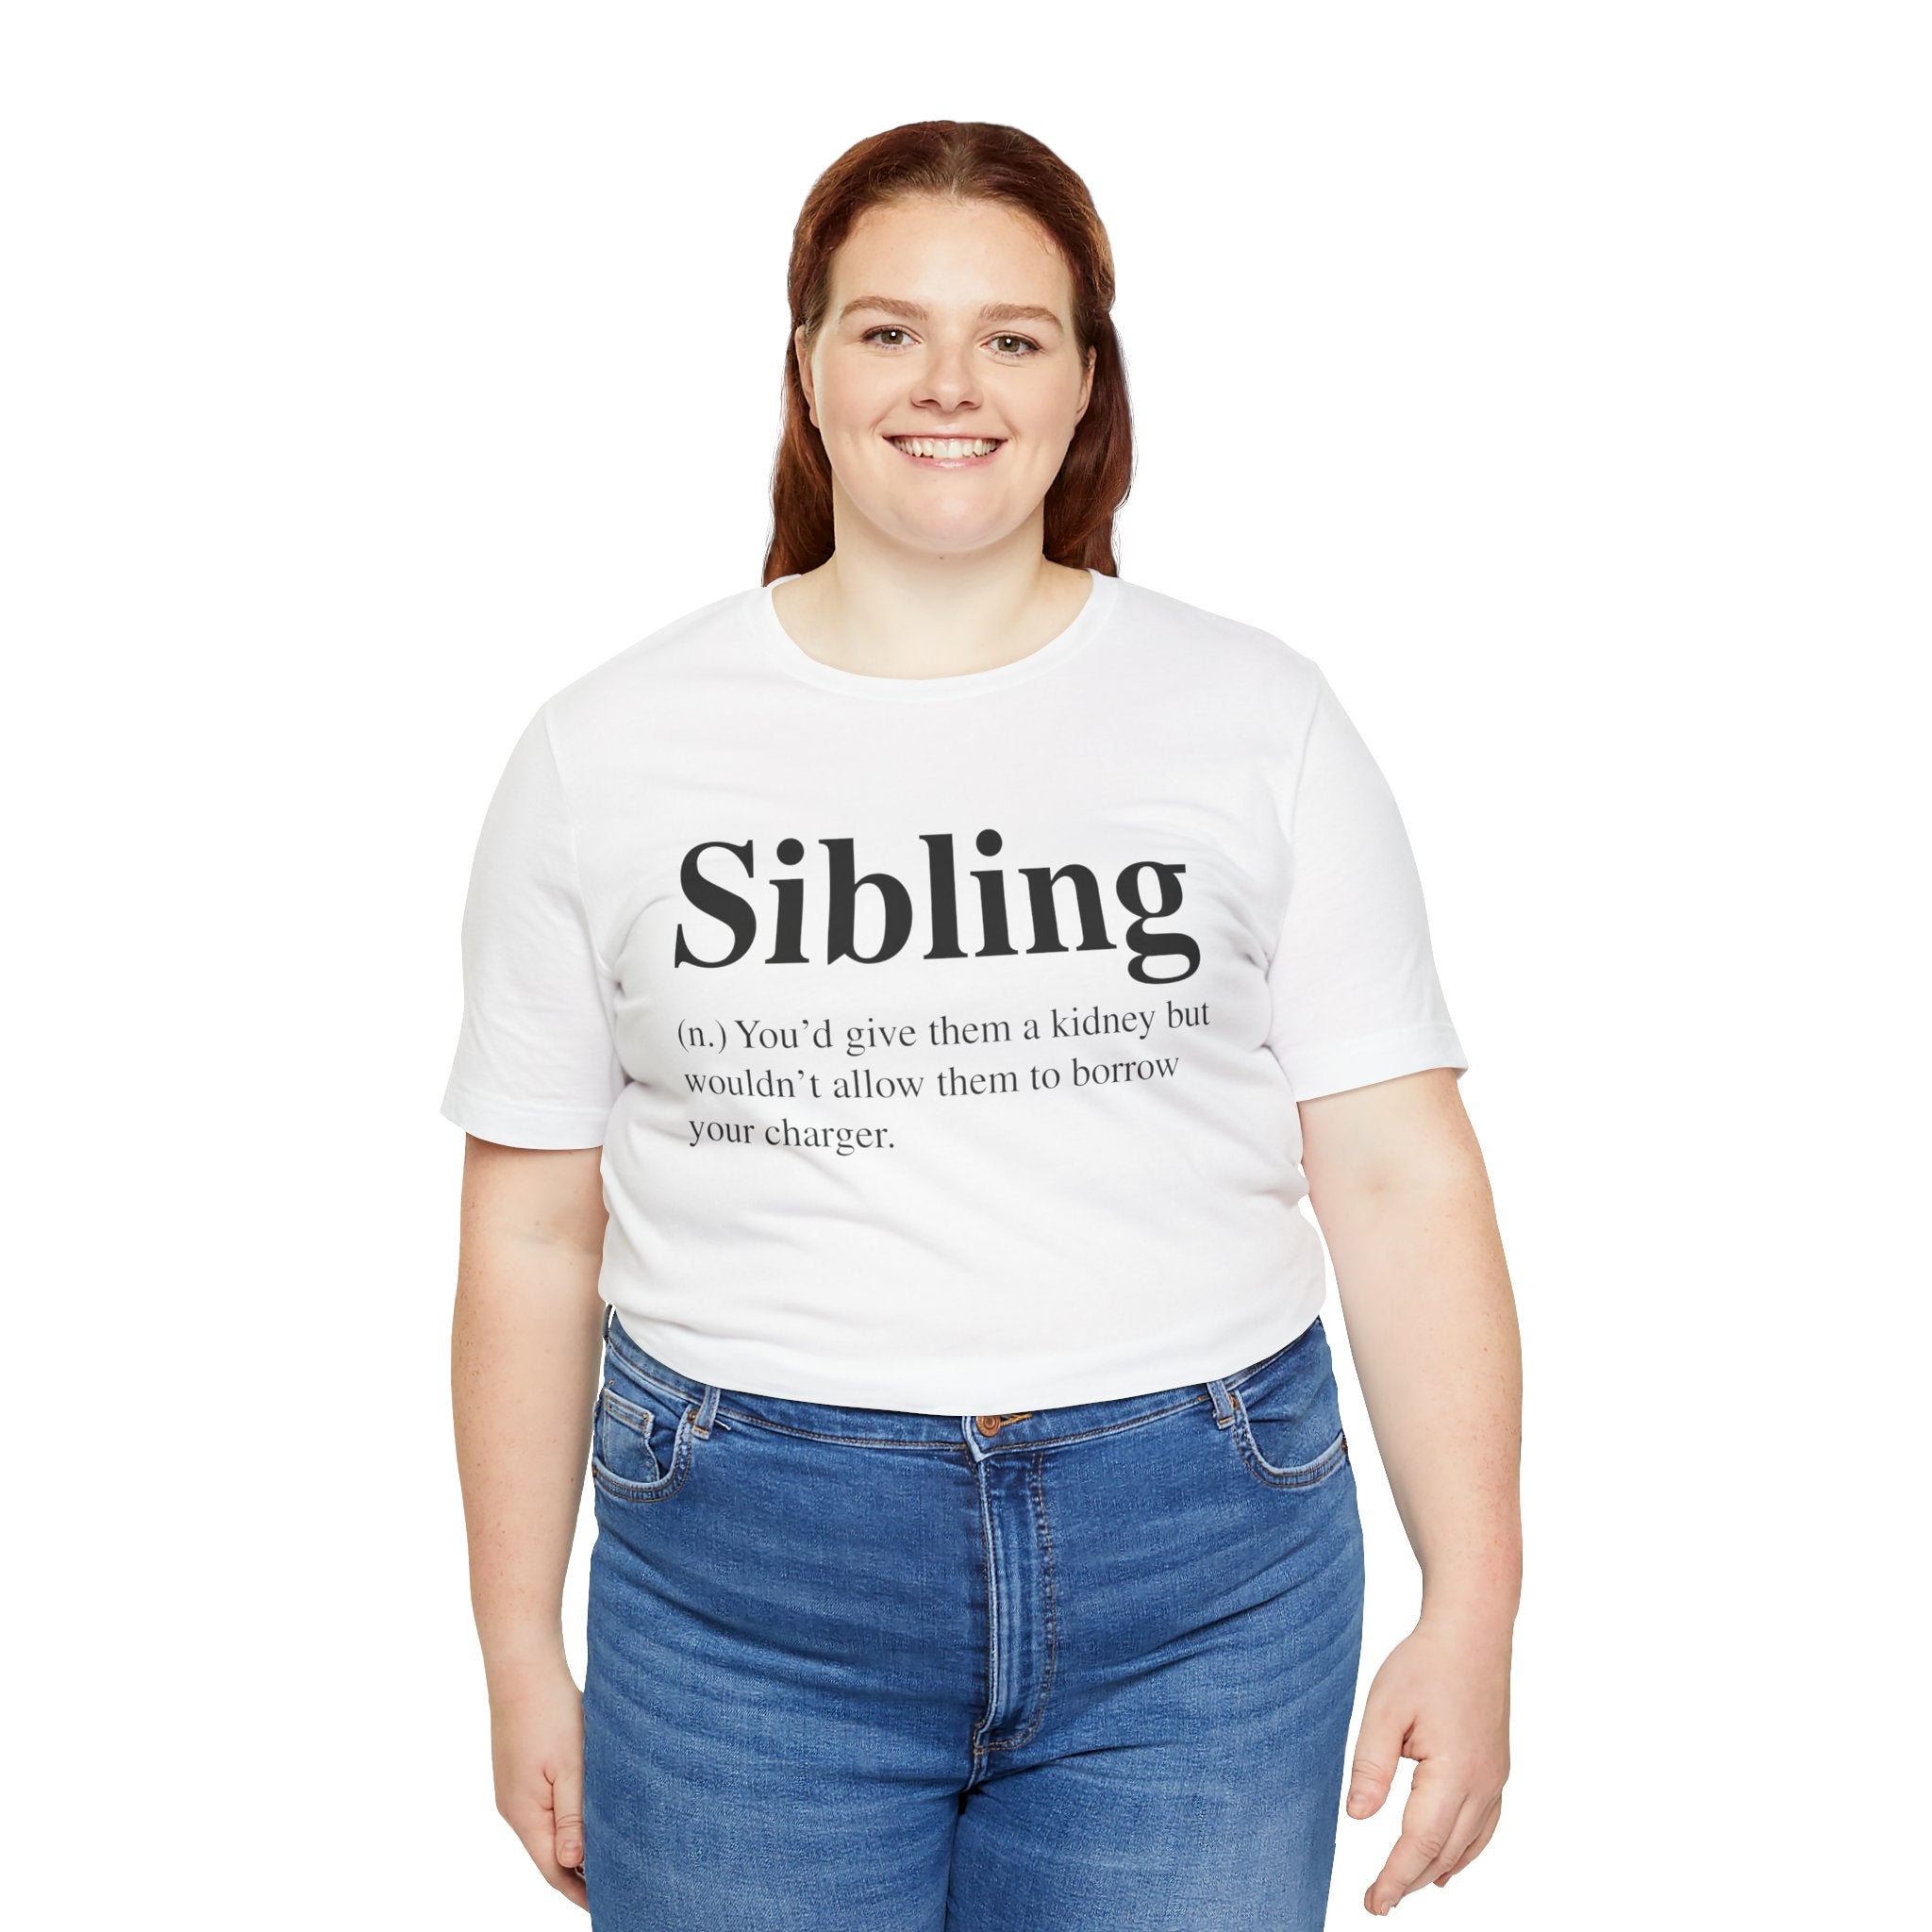 A woman in a white soft cotton Sibling T-Shirt with the word "siblings" and its humorous definition printed on it, paired with blue jeans, smiling at the camera.